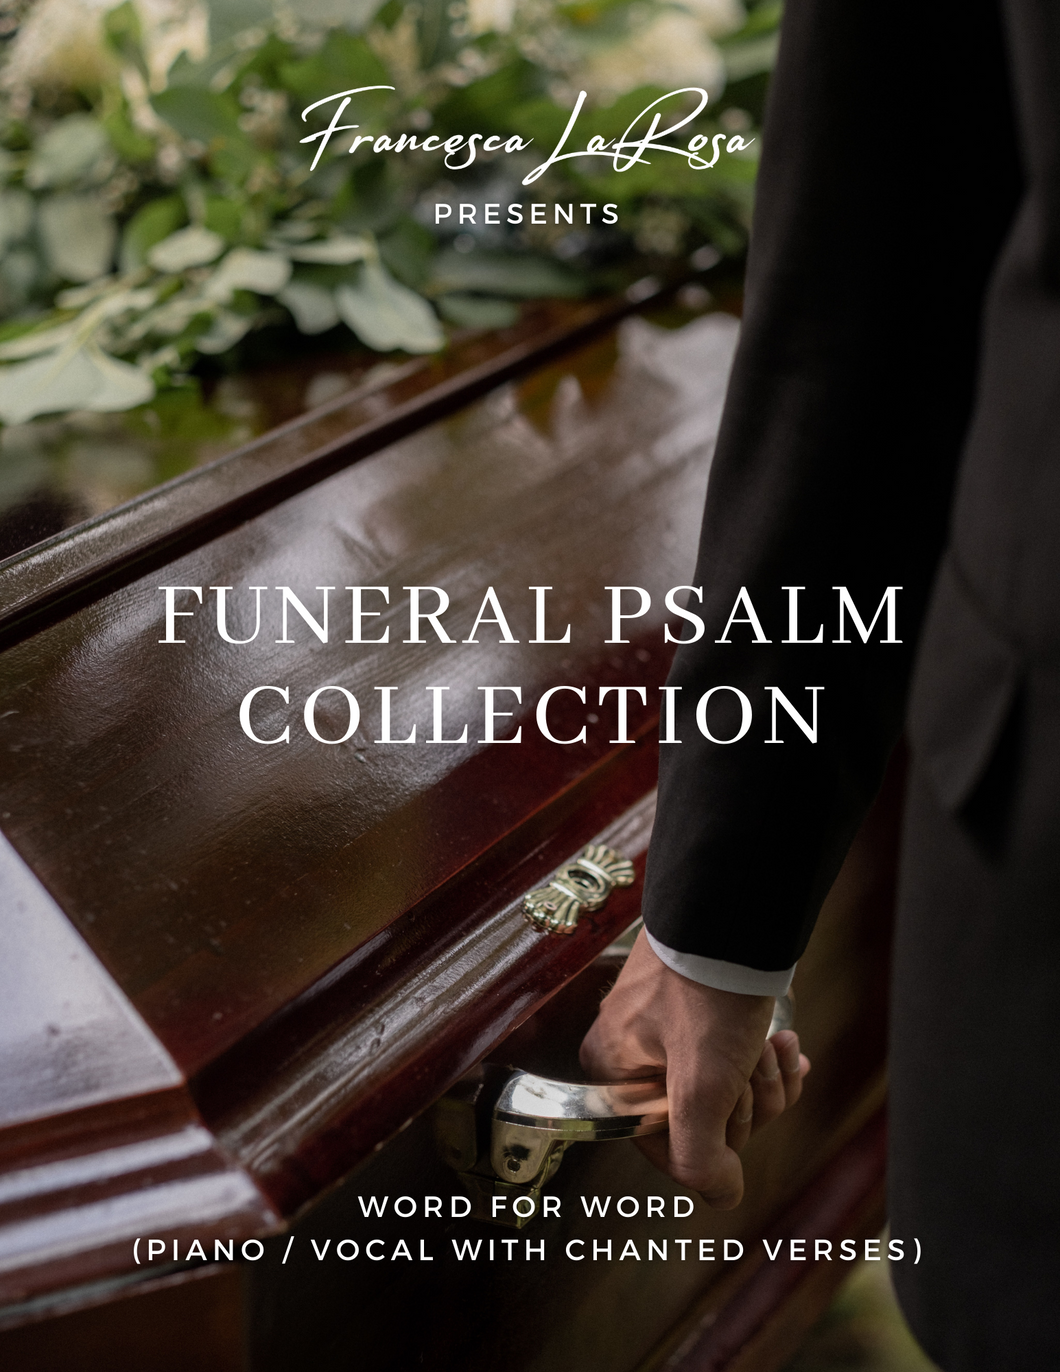 The Complete Funeral Psalm Collection (Piano / Vocal Chanted Verses)